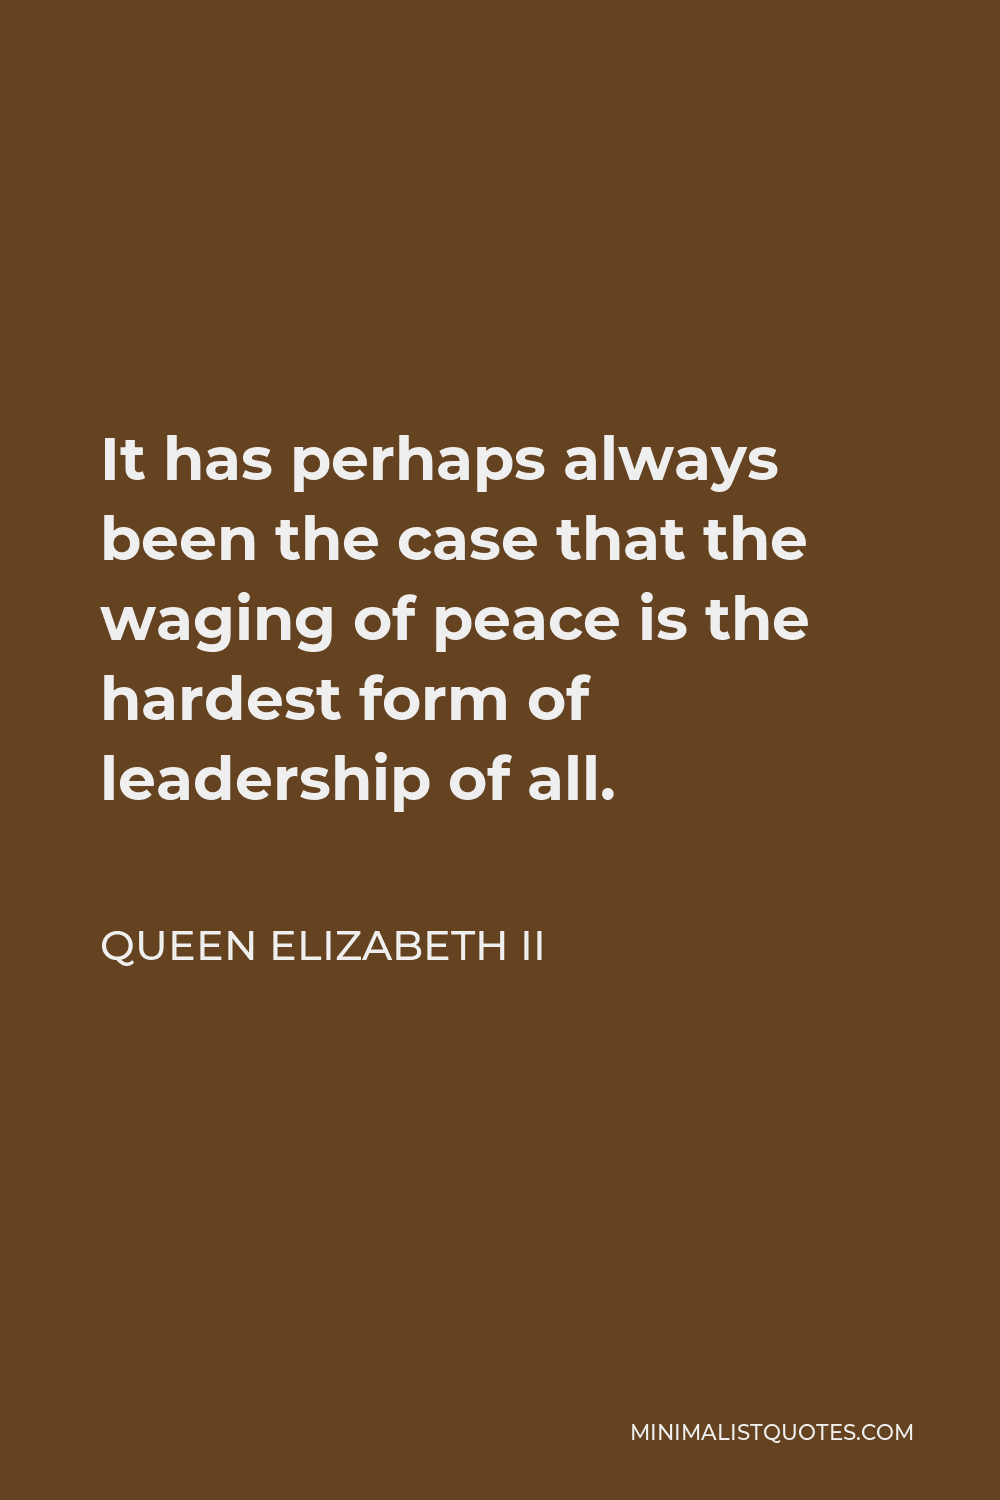 Queen Elizabeth II Quote - It has perhaps always been the case that the waging of peace is the hardest form of leadership of all.